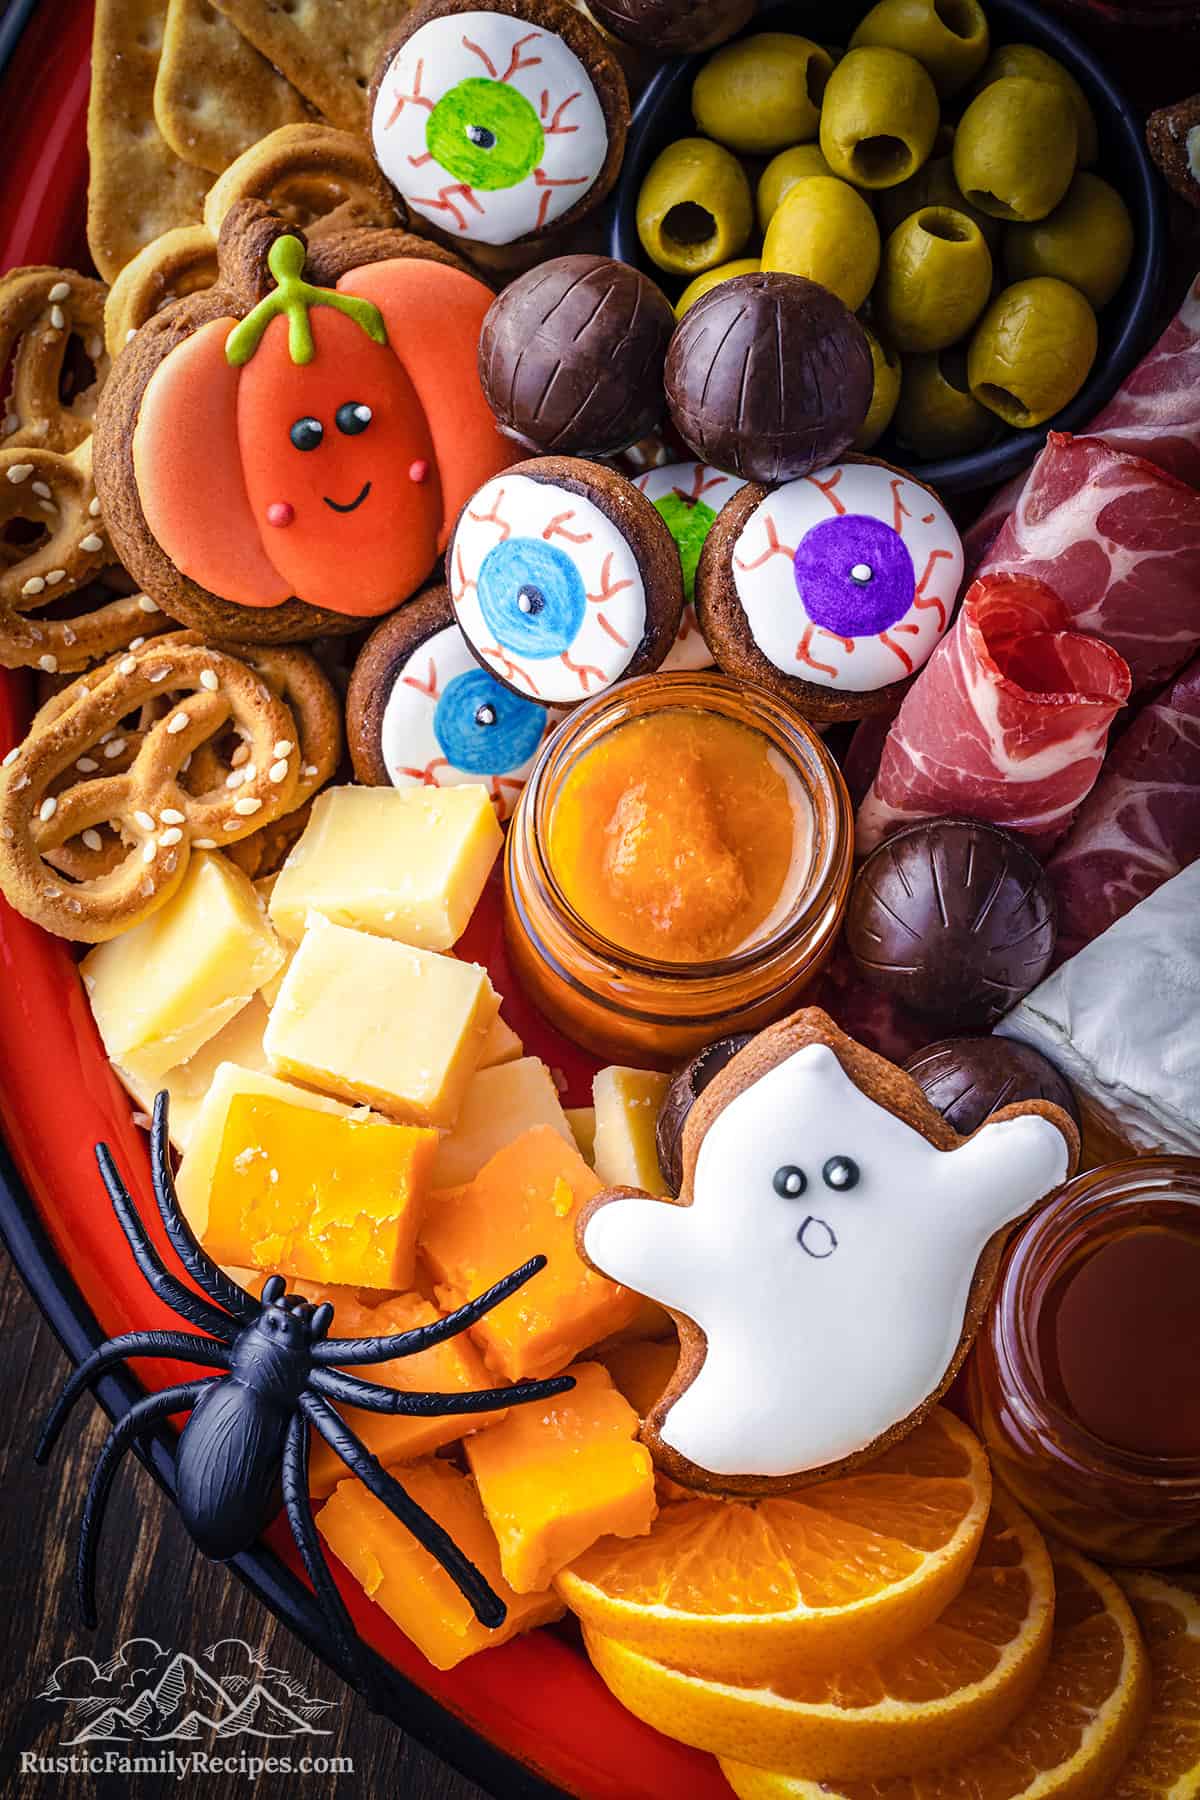 A halloween themed charcuterie board with a plastic spider and ghost cookies.